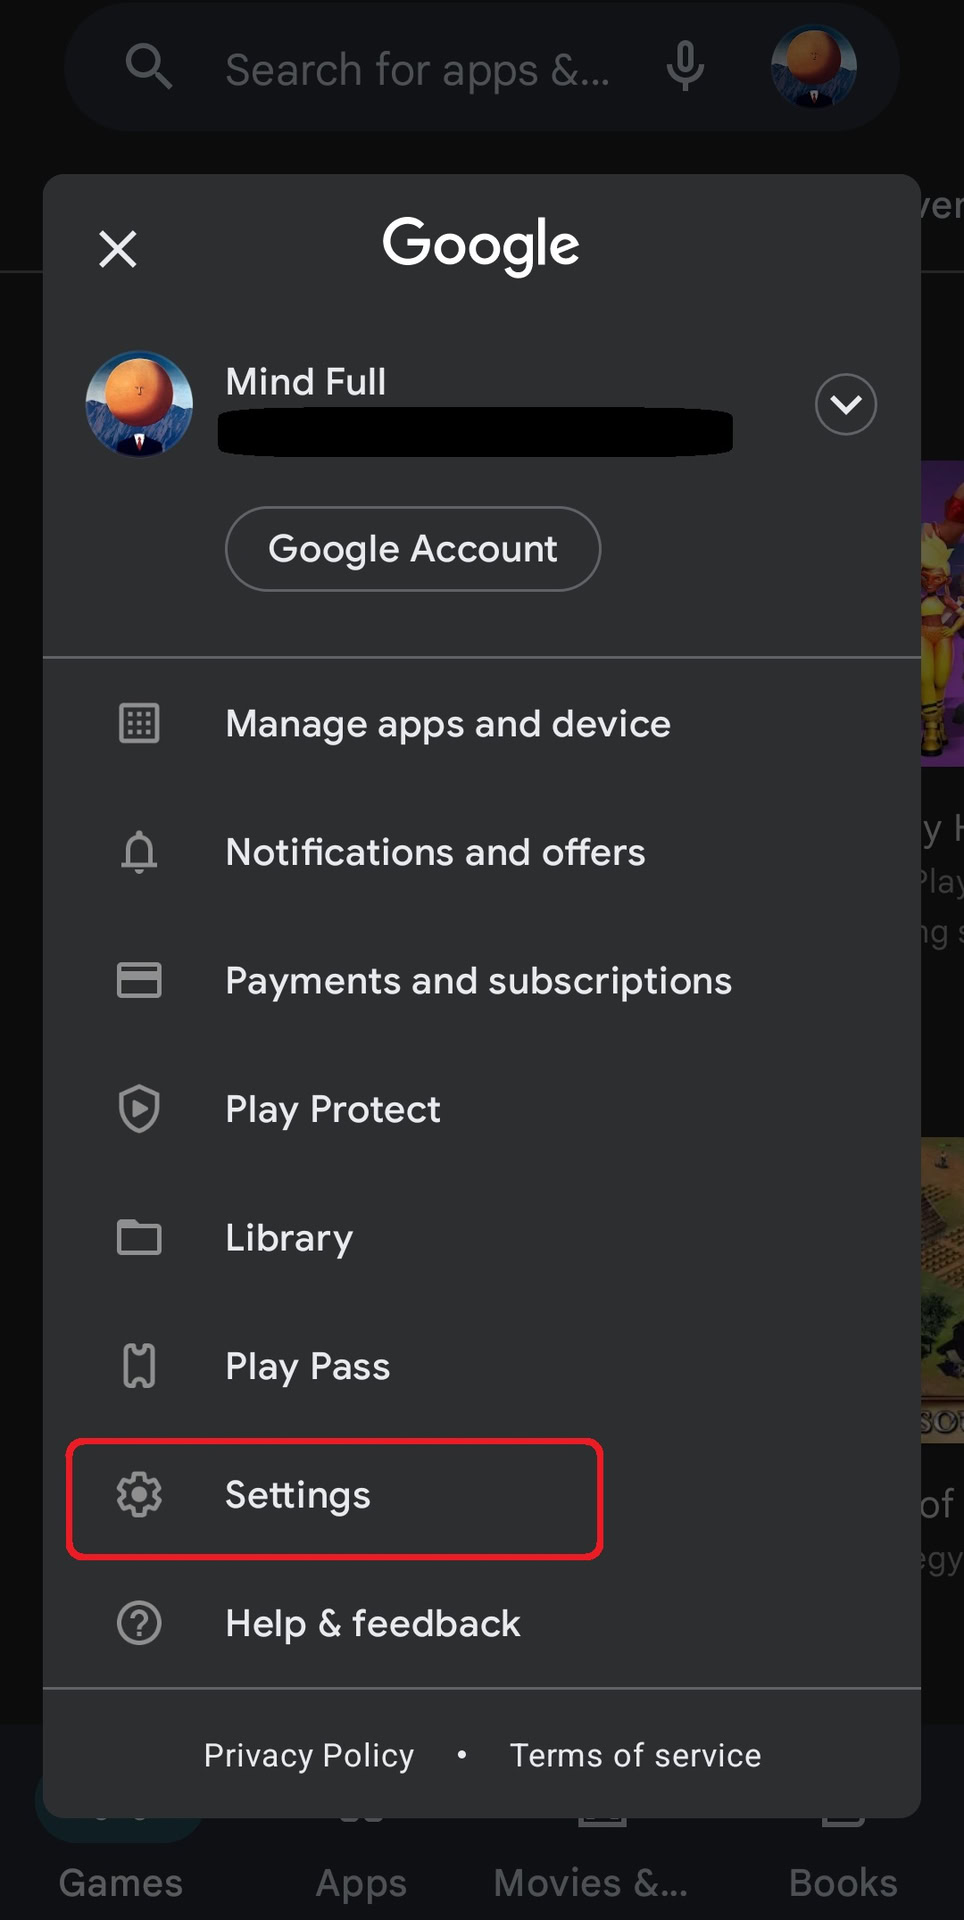 How to Subscribe to Google Play Pass, If you're in the Philippines